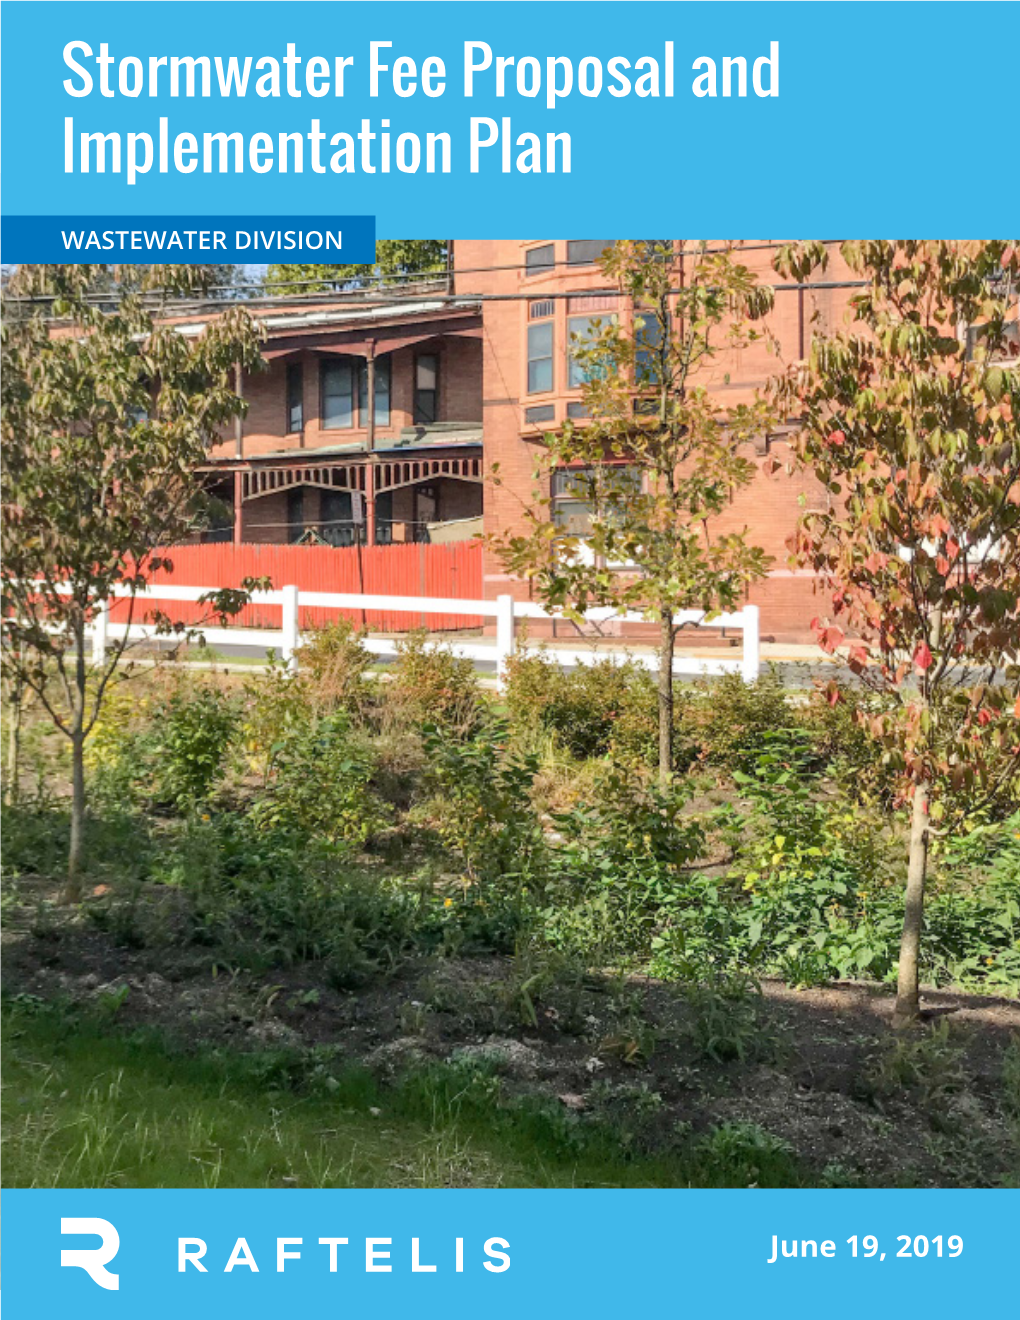 Stormwater Fee Proposal and Implementation Plan